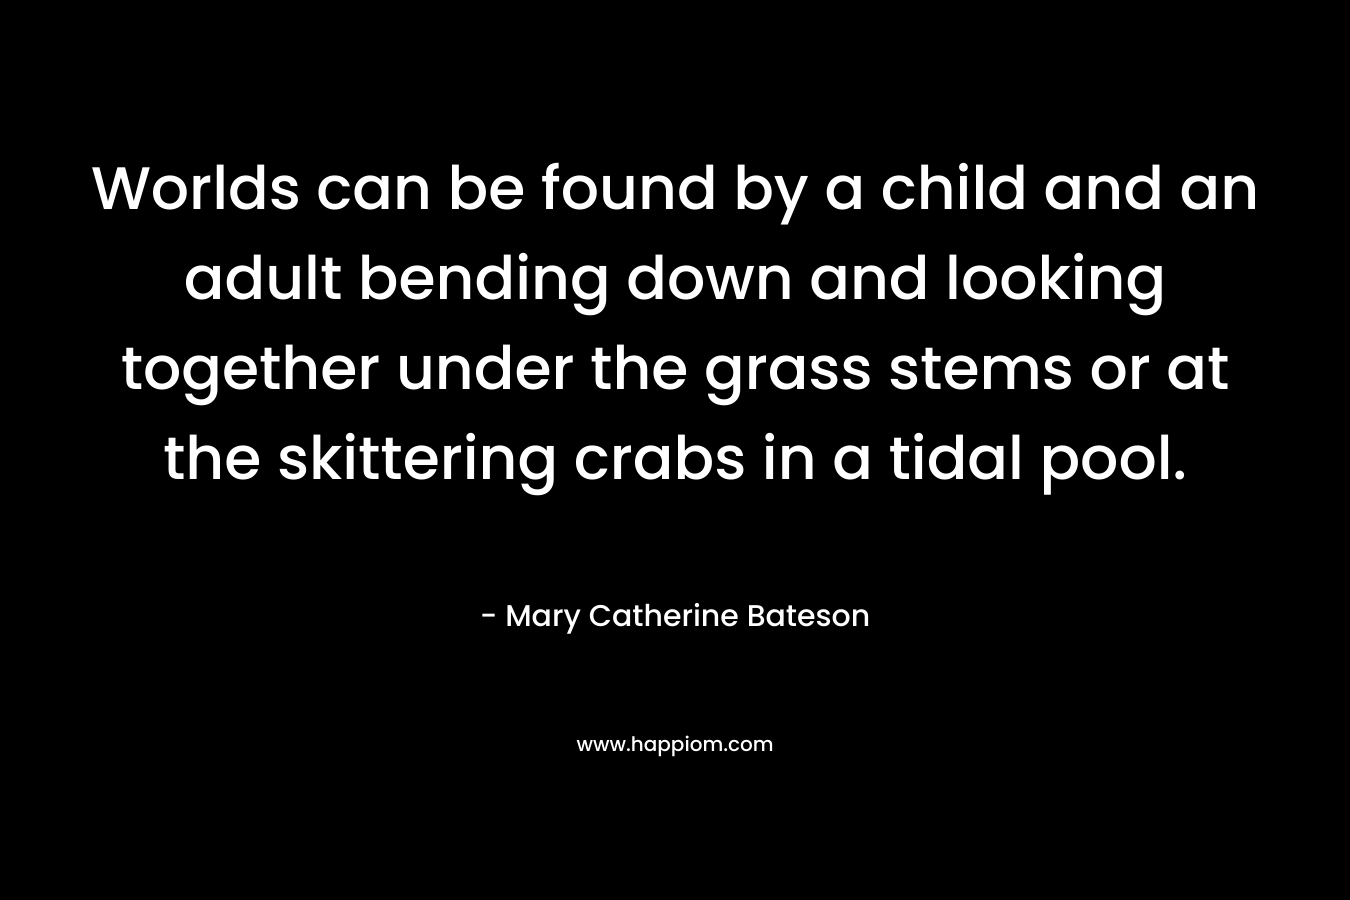 Worlds can be found by a child and an adult bending down and looking together under the grass stems or at the skittering crabs in a tidal pool. – Mary Catherine Bateson